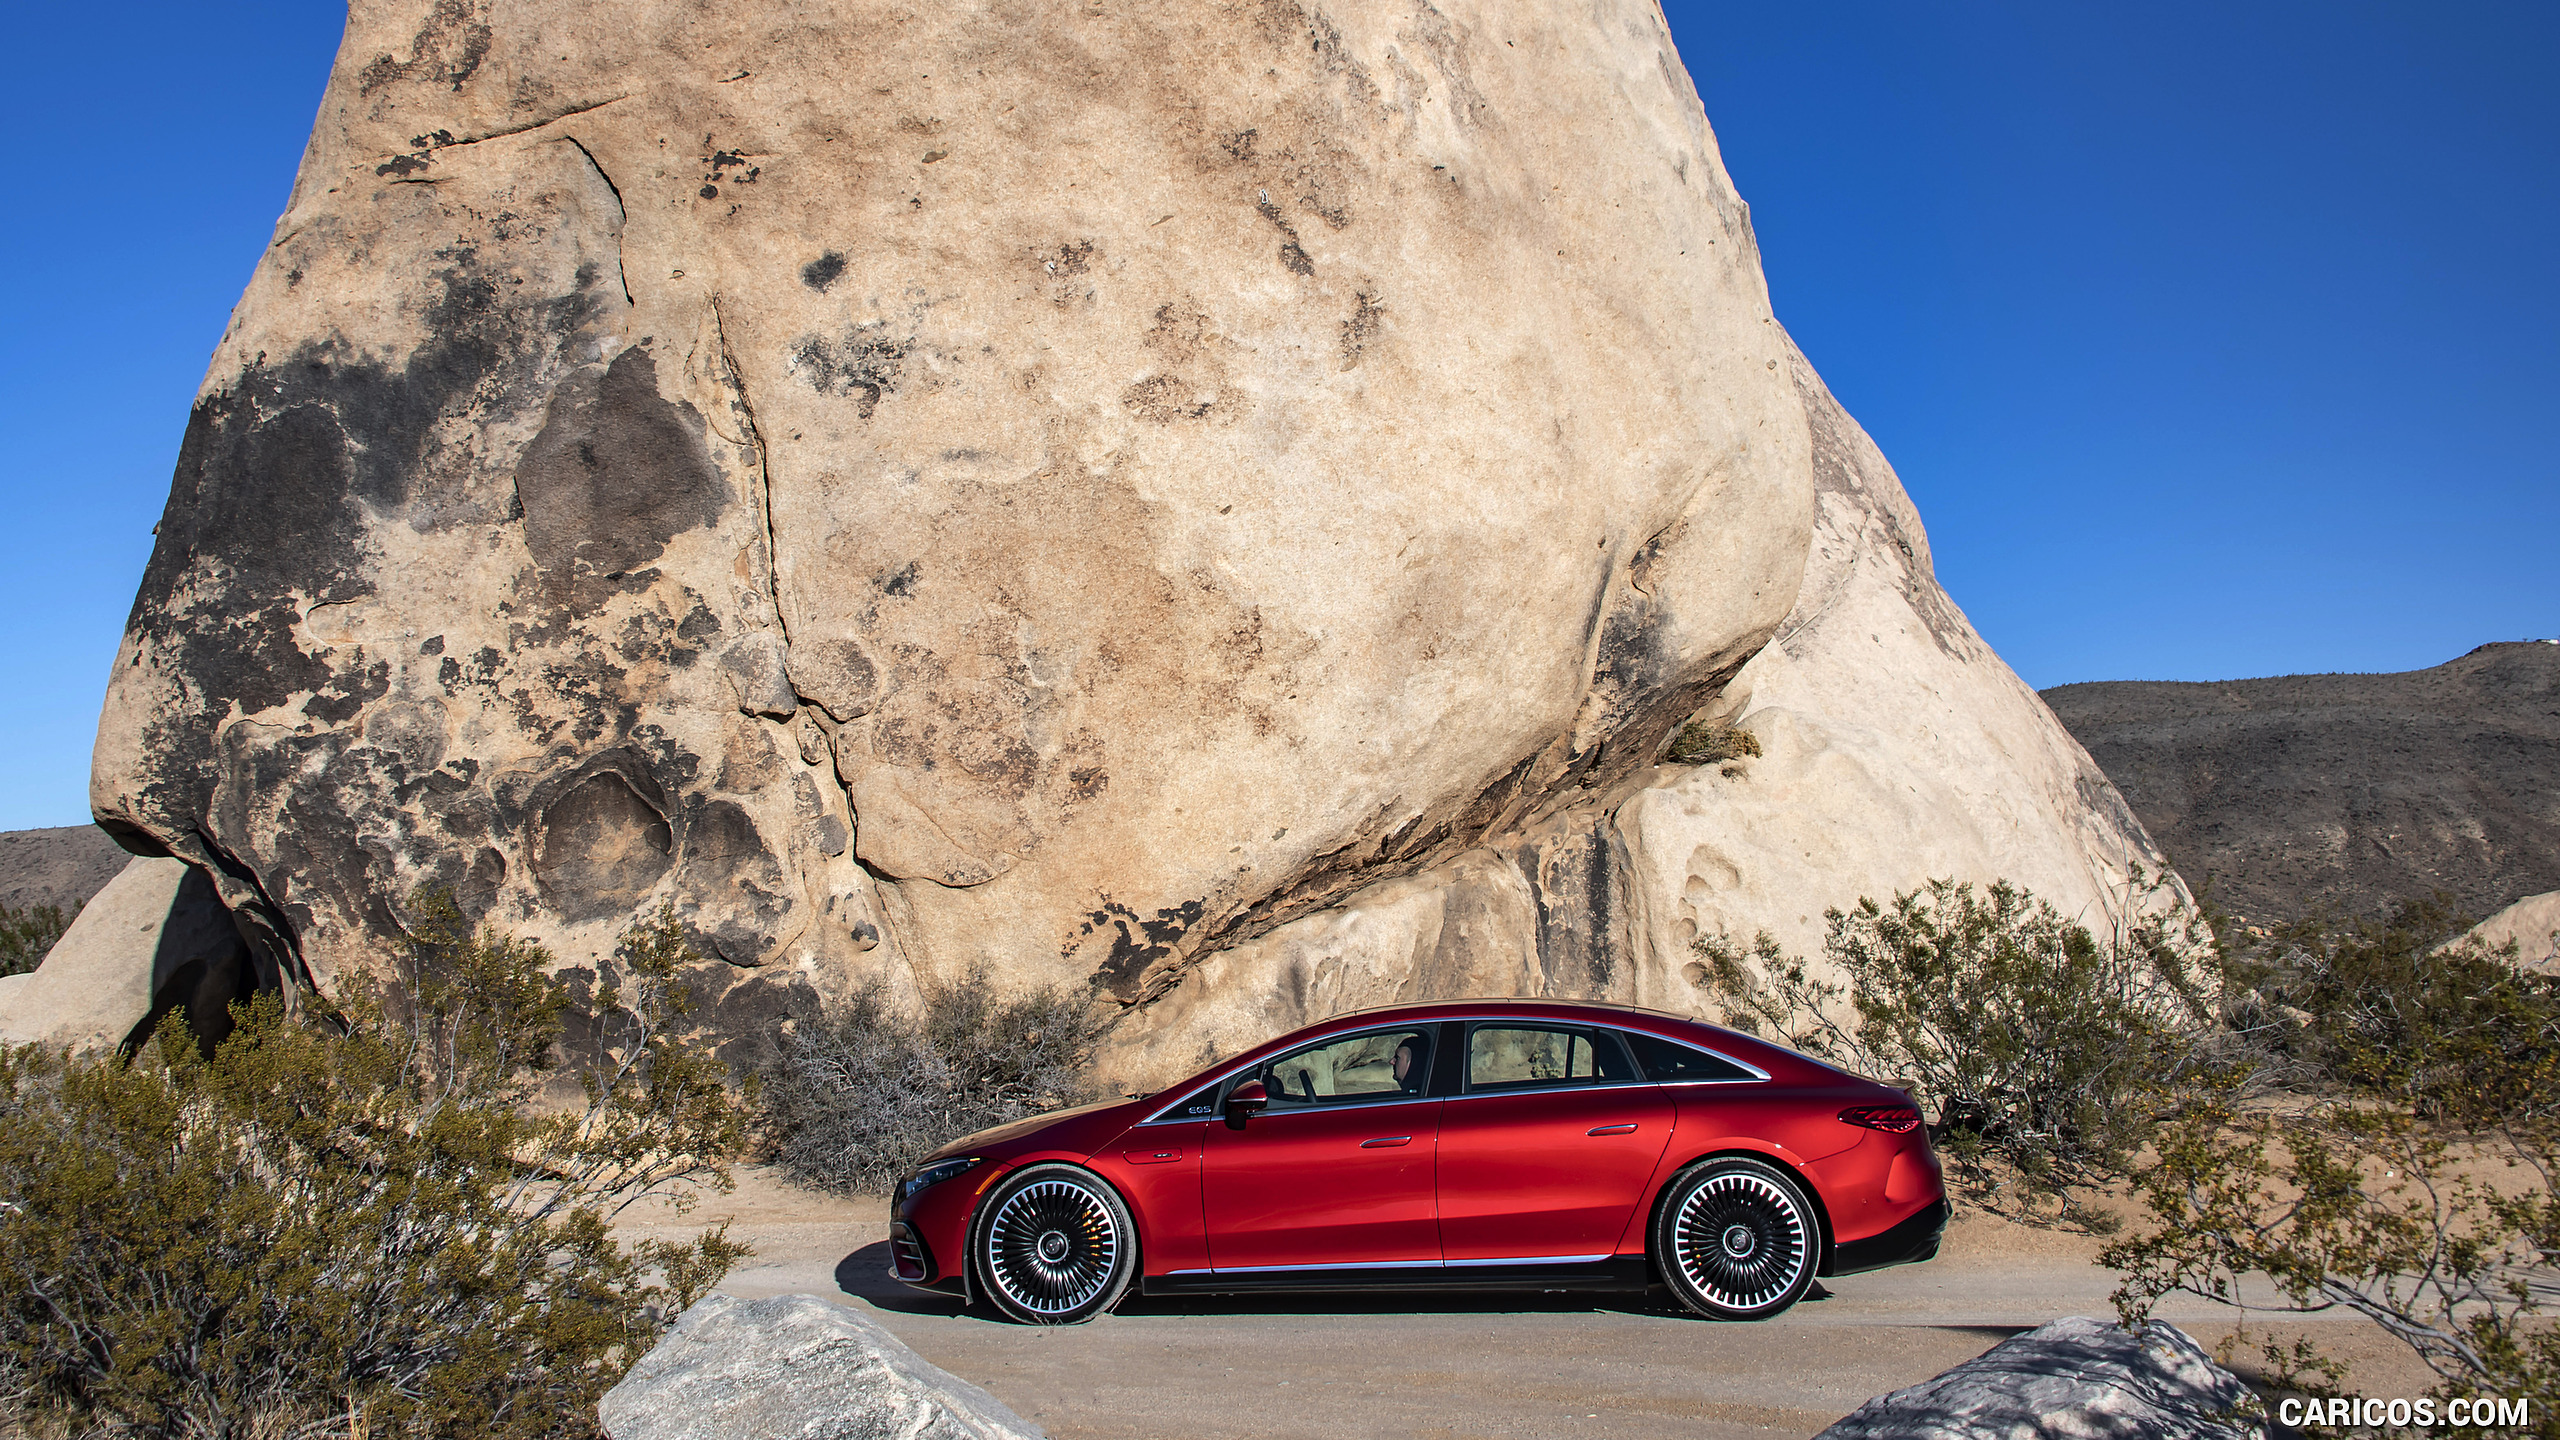 2022 Mercedes-AMG EQS 53 4MATIC+ (Color: Hyazinth Red Metallic) - Side, #59 of 76